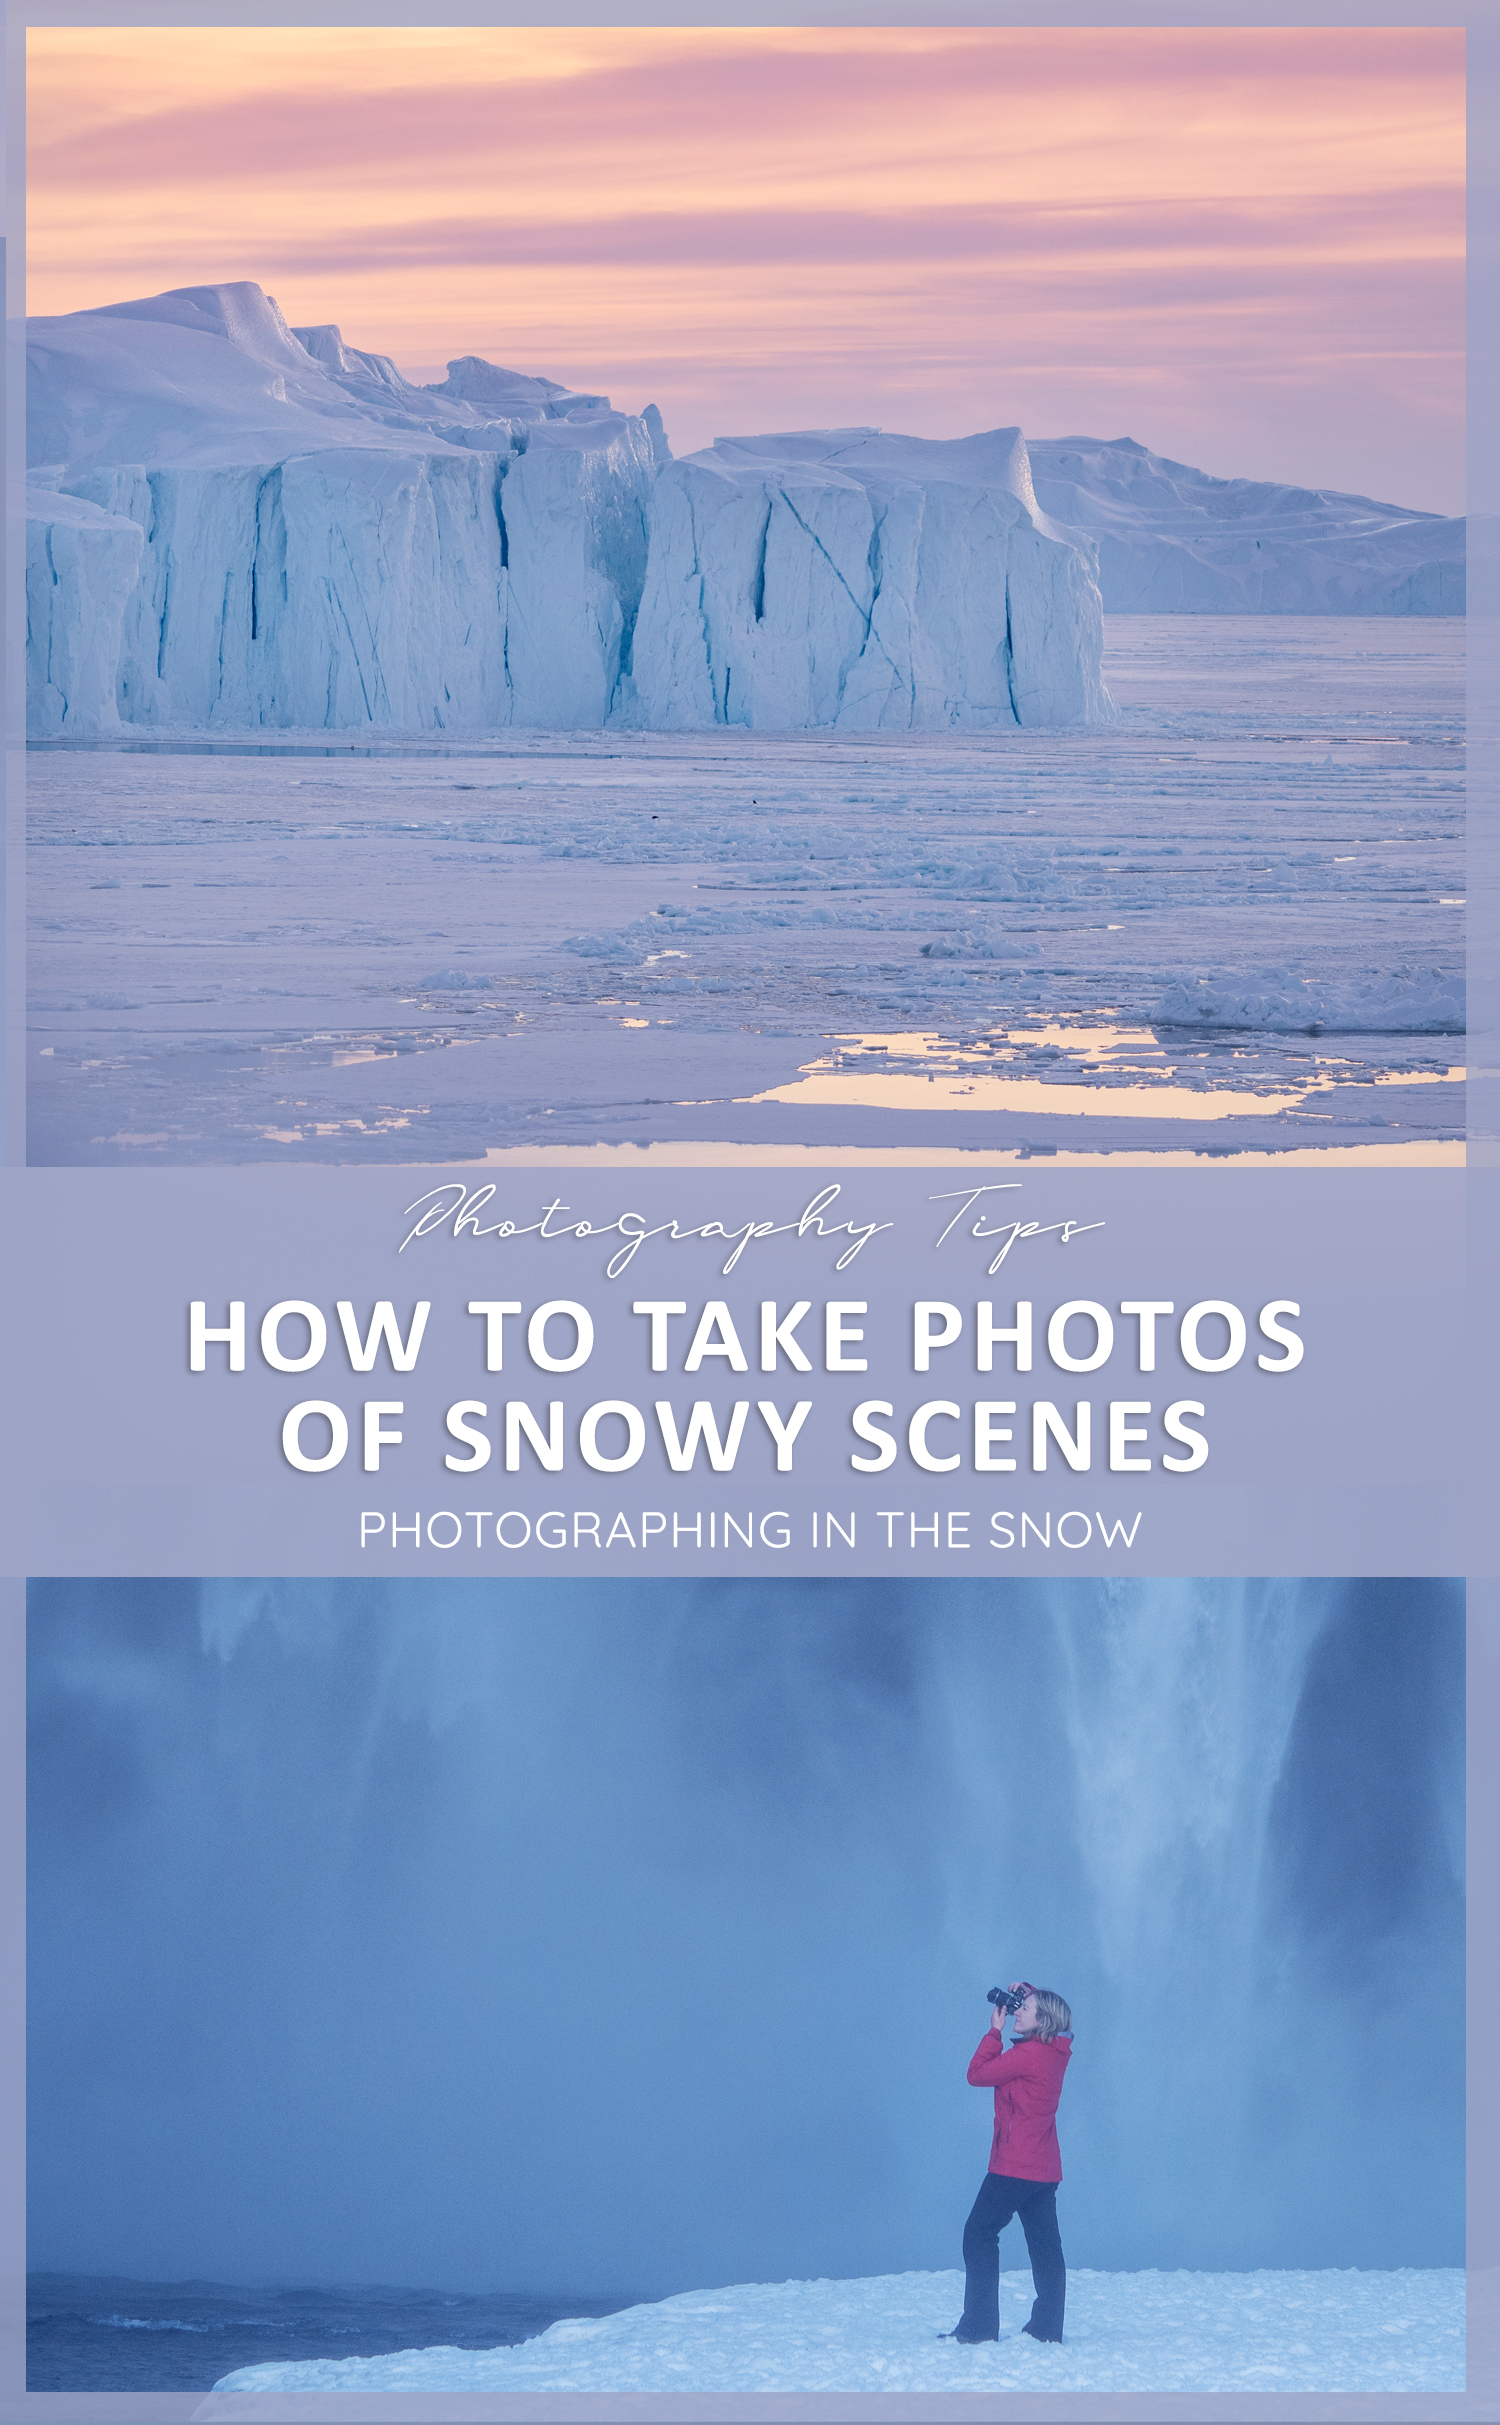 How to take photos of Snow - Photographing Snow